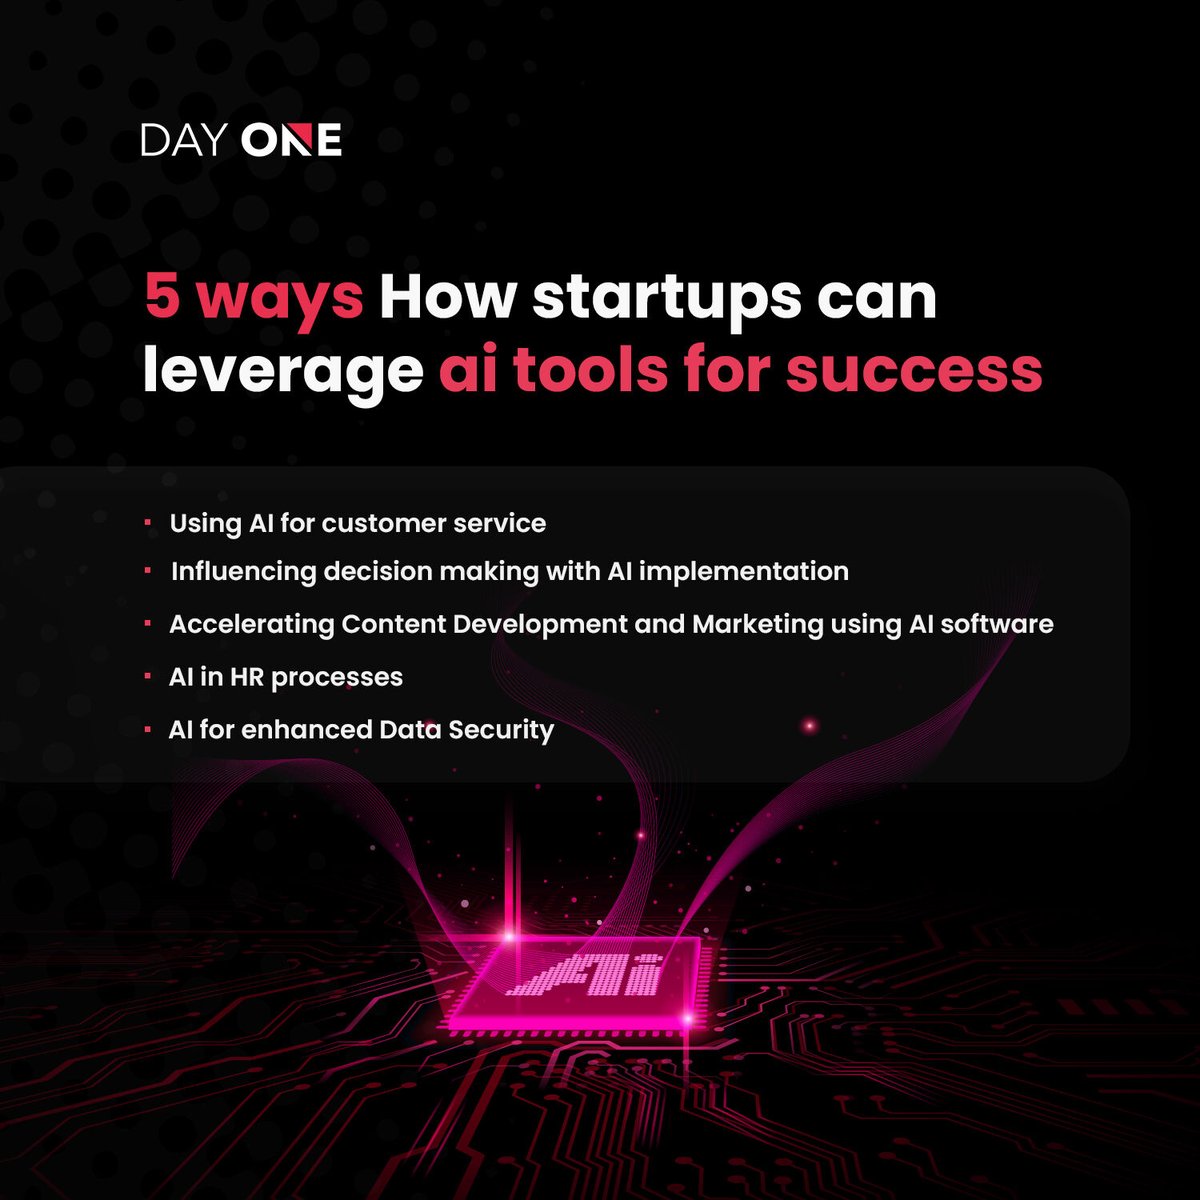 The timely adoption of Artificial intelligence into organizations helped in optimizing resources, improving productivity, reducing costs, automation, and digital transformation. #ai #aitools #startup #appdevelopment #dayone #dayonetech #appdevelopmentcompany